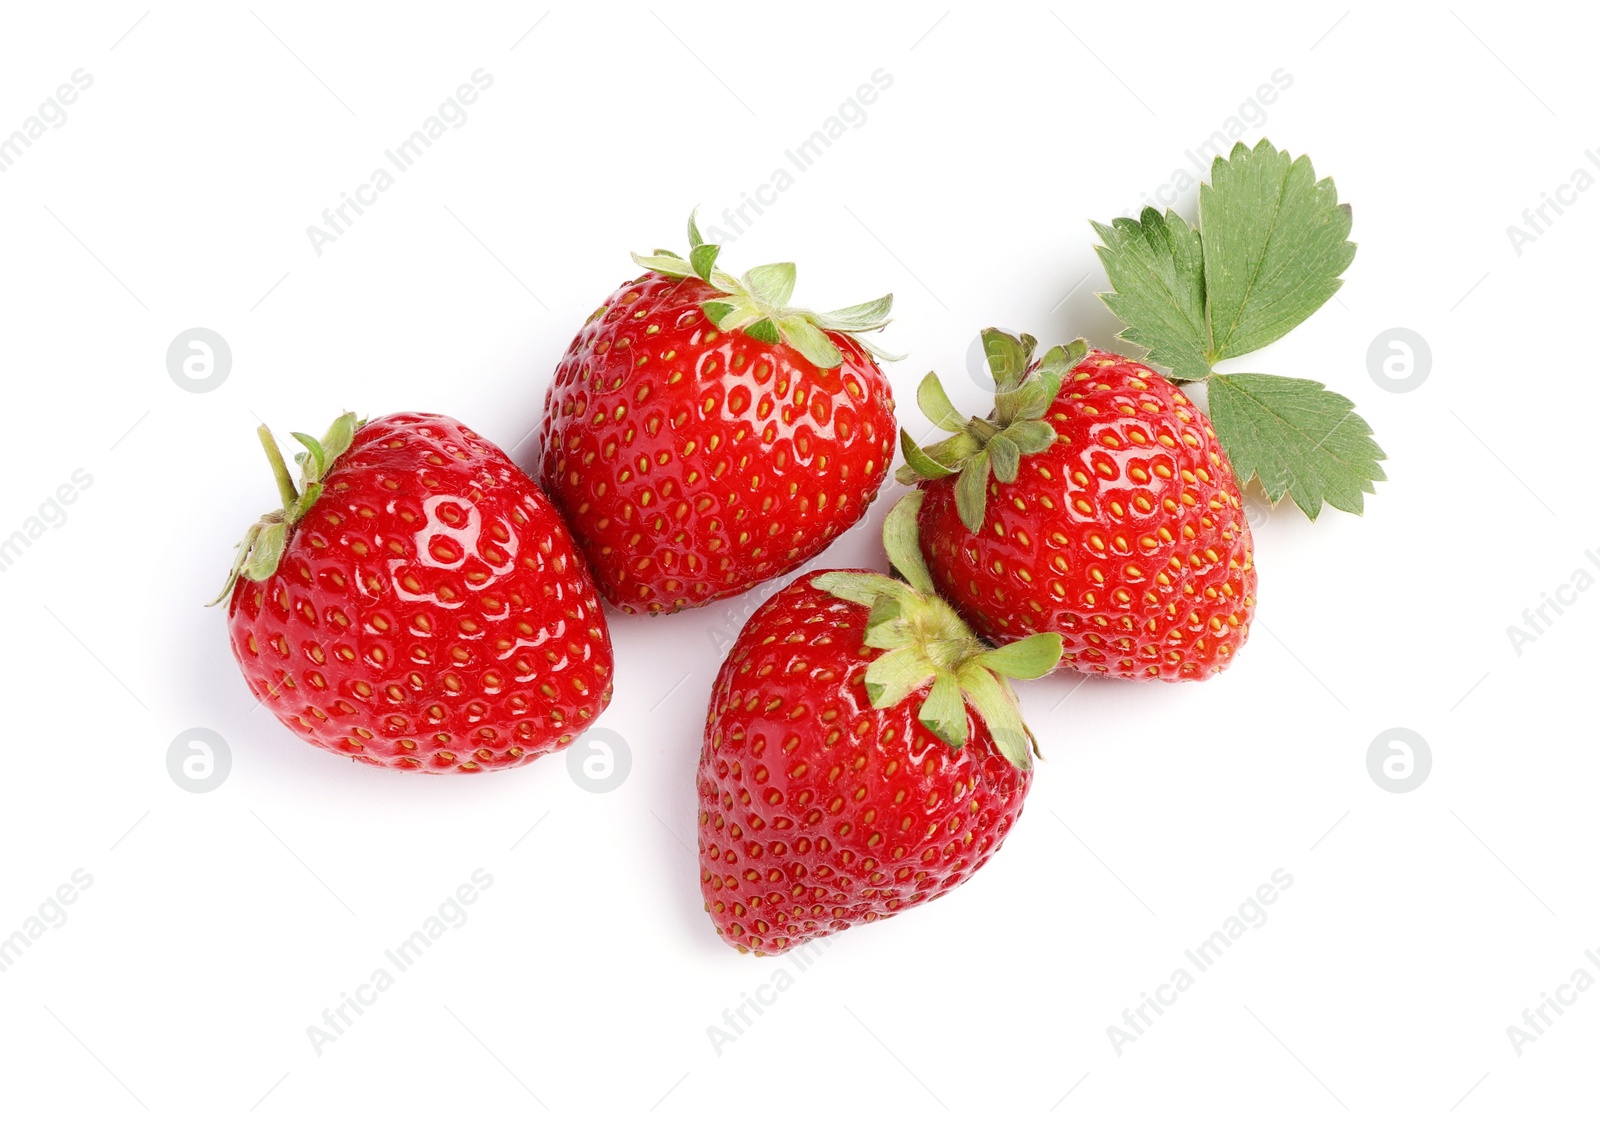 Photo of Delicious fresh red strawberries and green leaf on white background, top view